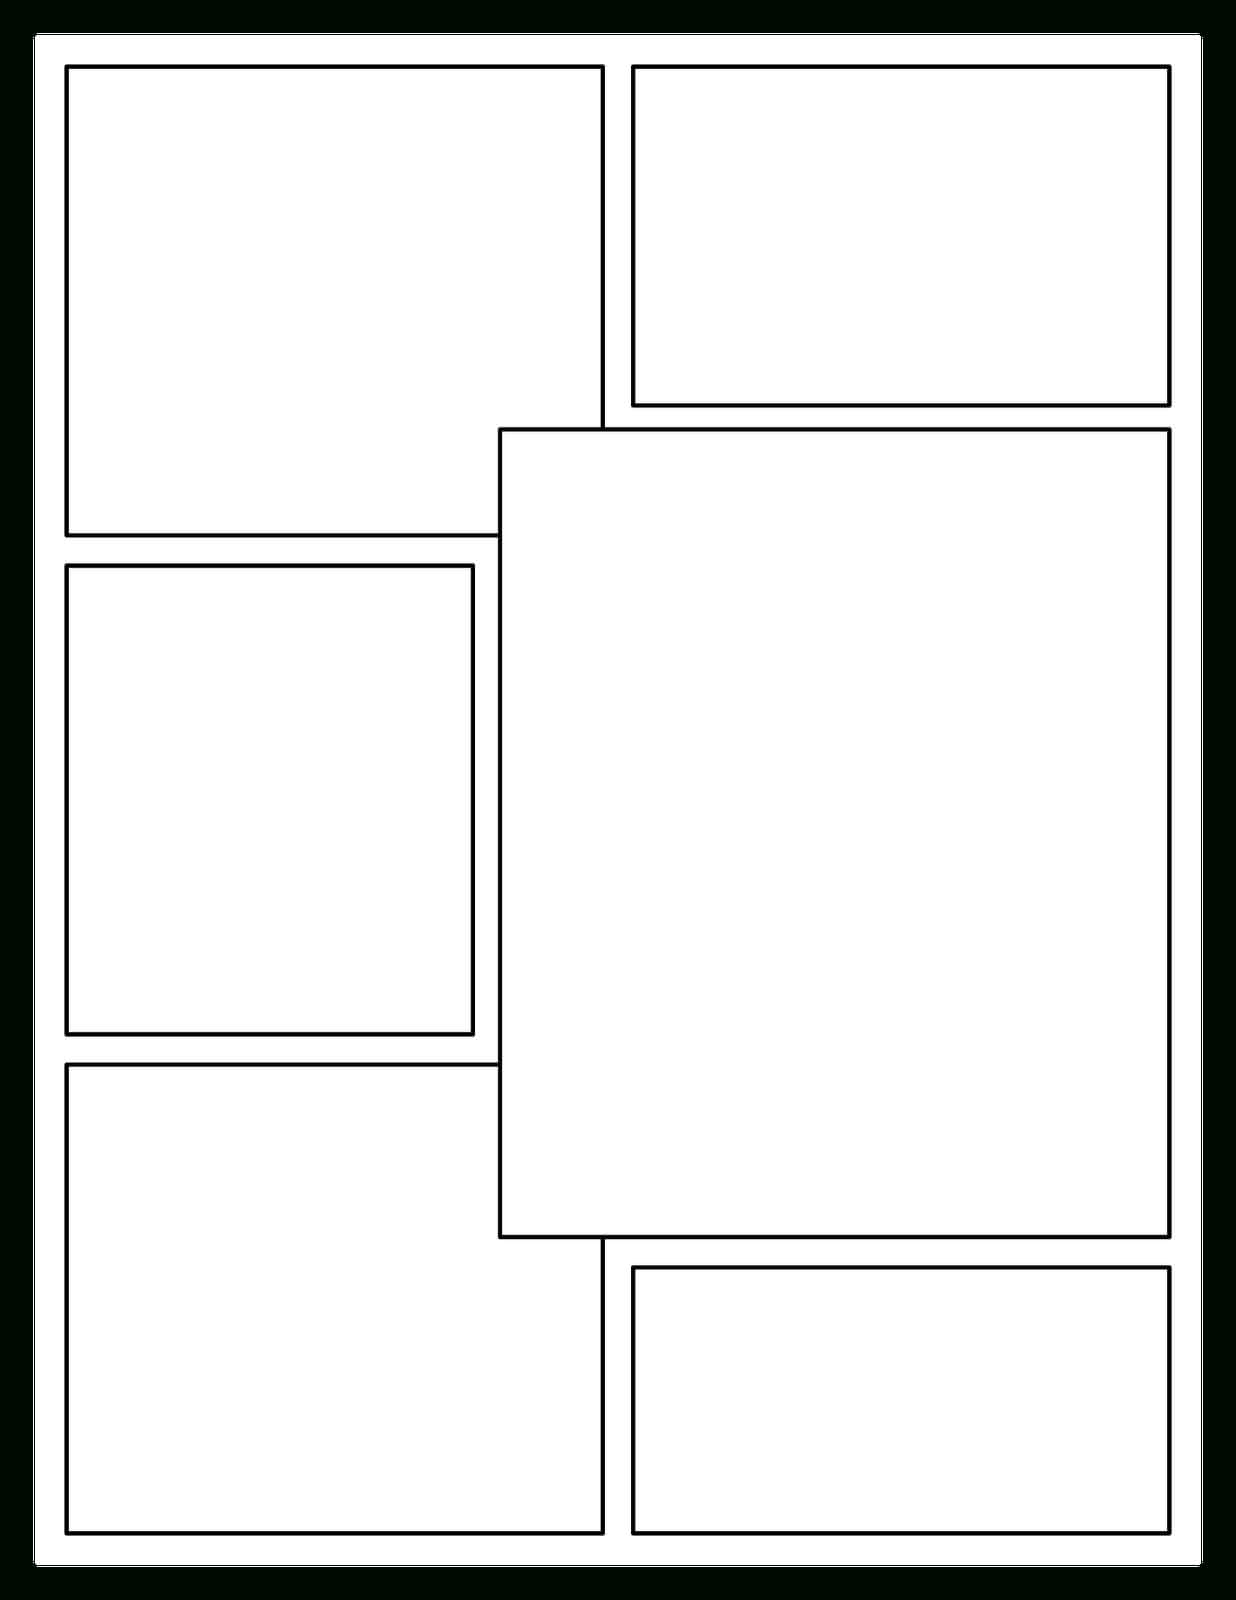 60 Fun Comic Strip Templates | Kittybabylove Pertaining To Printable Blank Comic Strip Template For Kids